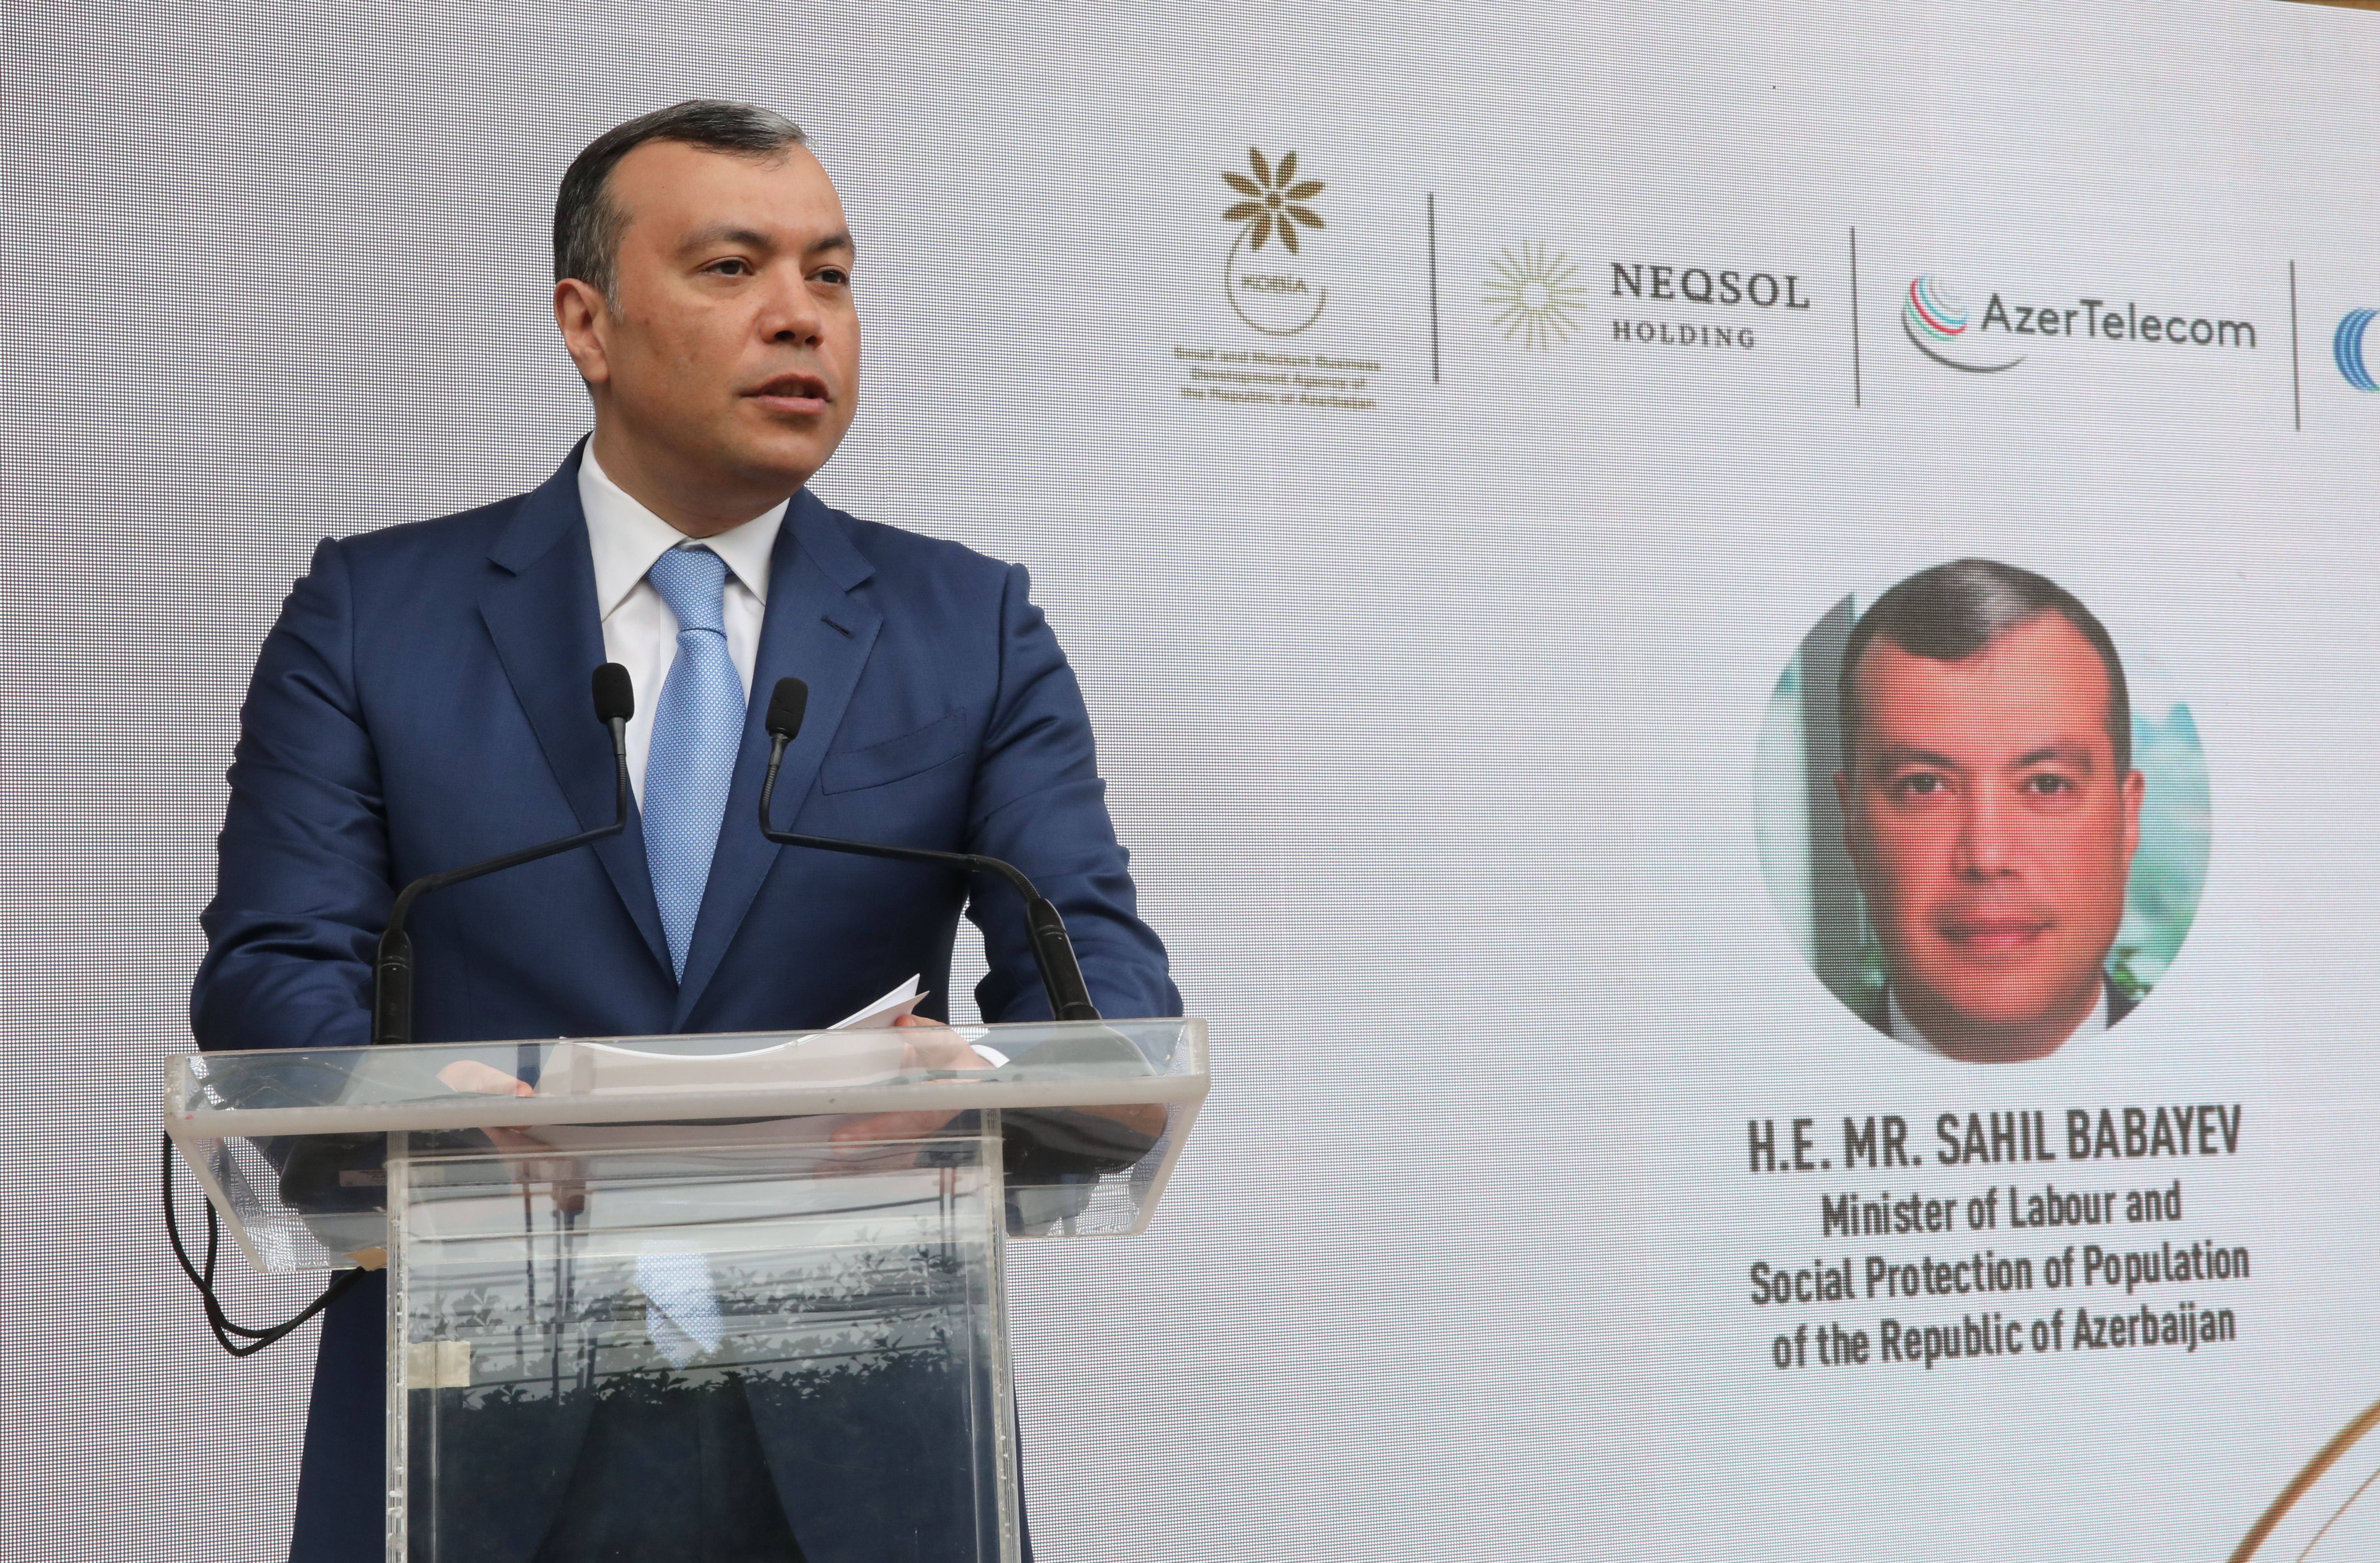 Azerbaijan-UAE SME Forum was held in Dubai as part of the Annual Investment Meeting 